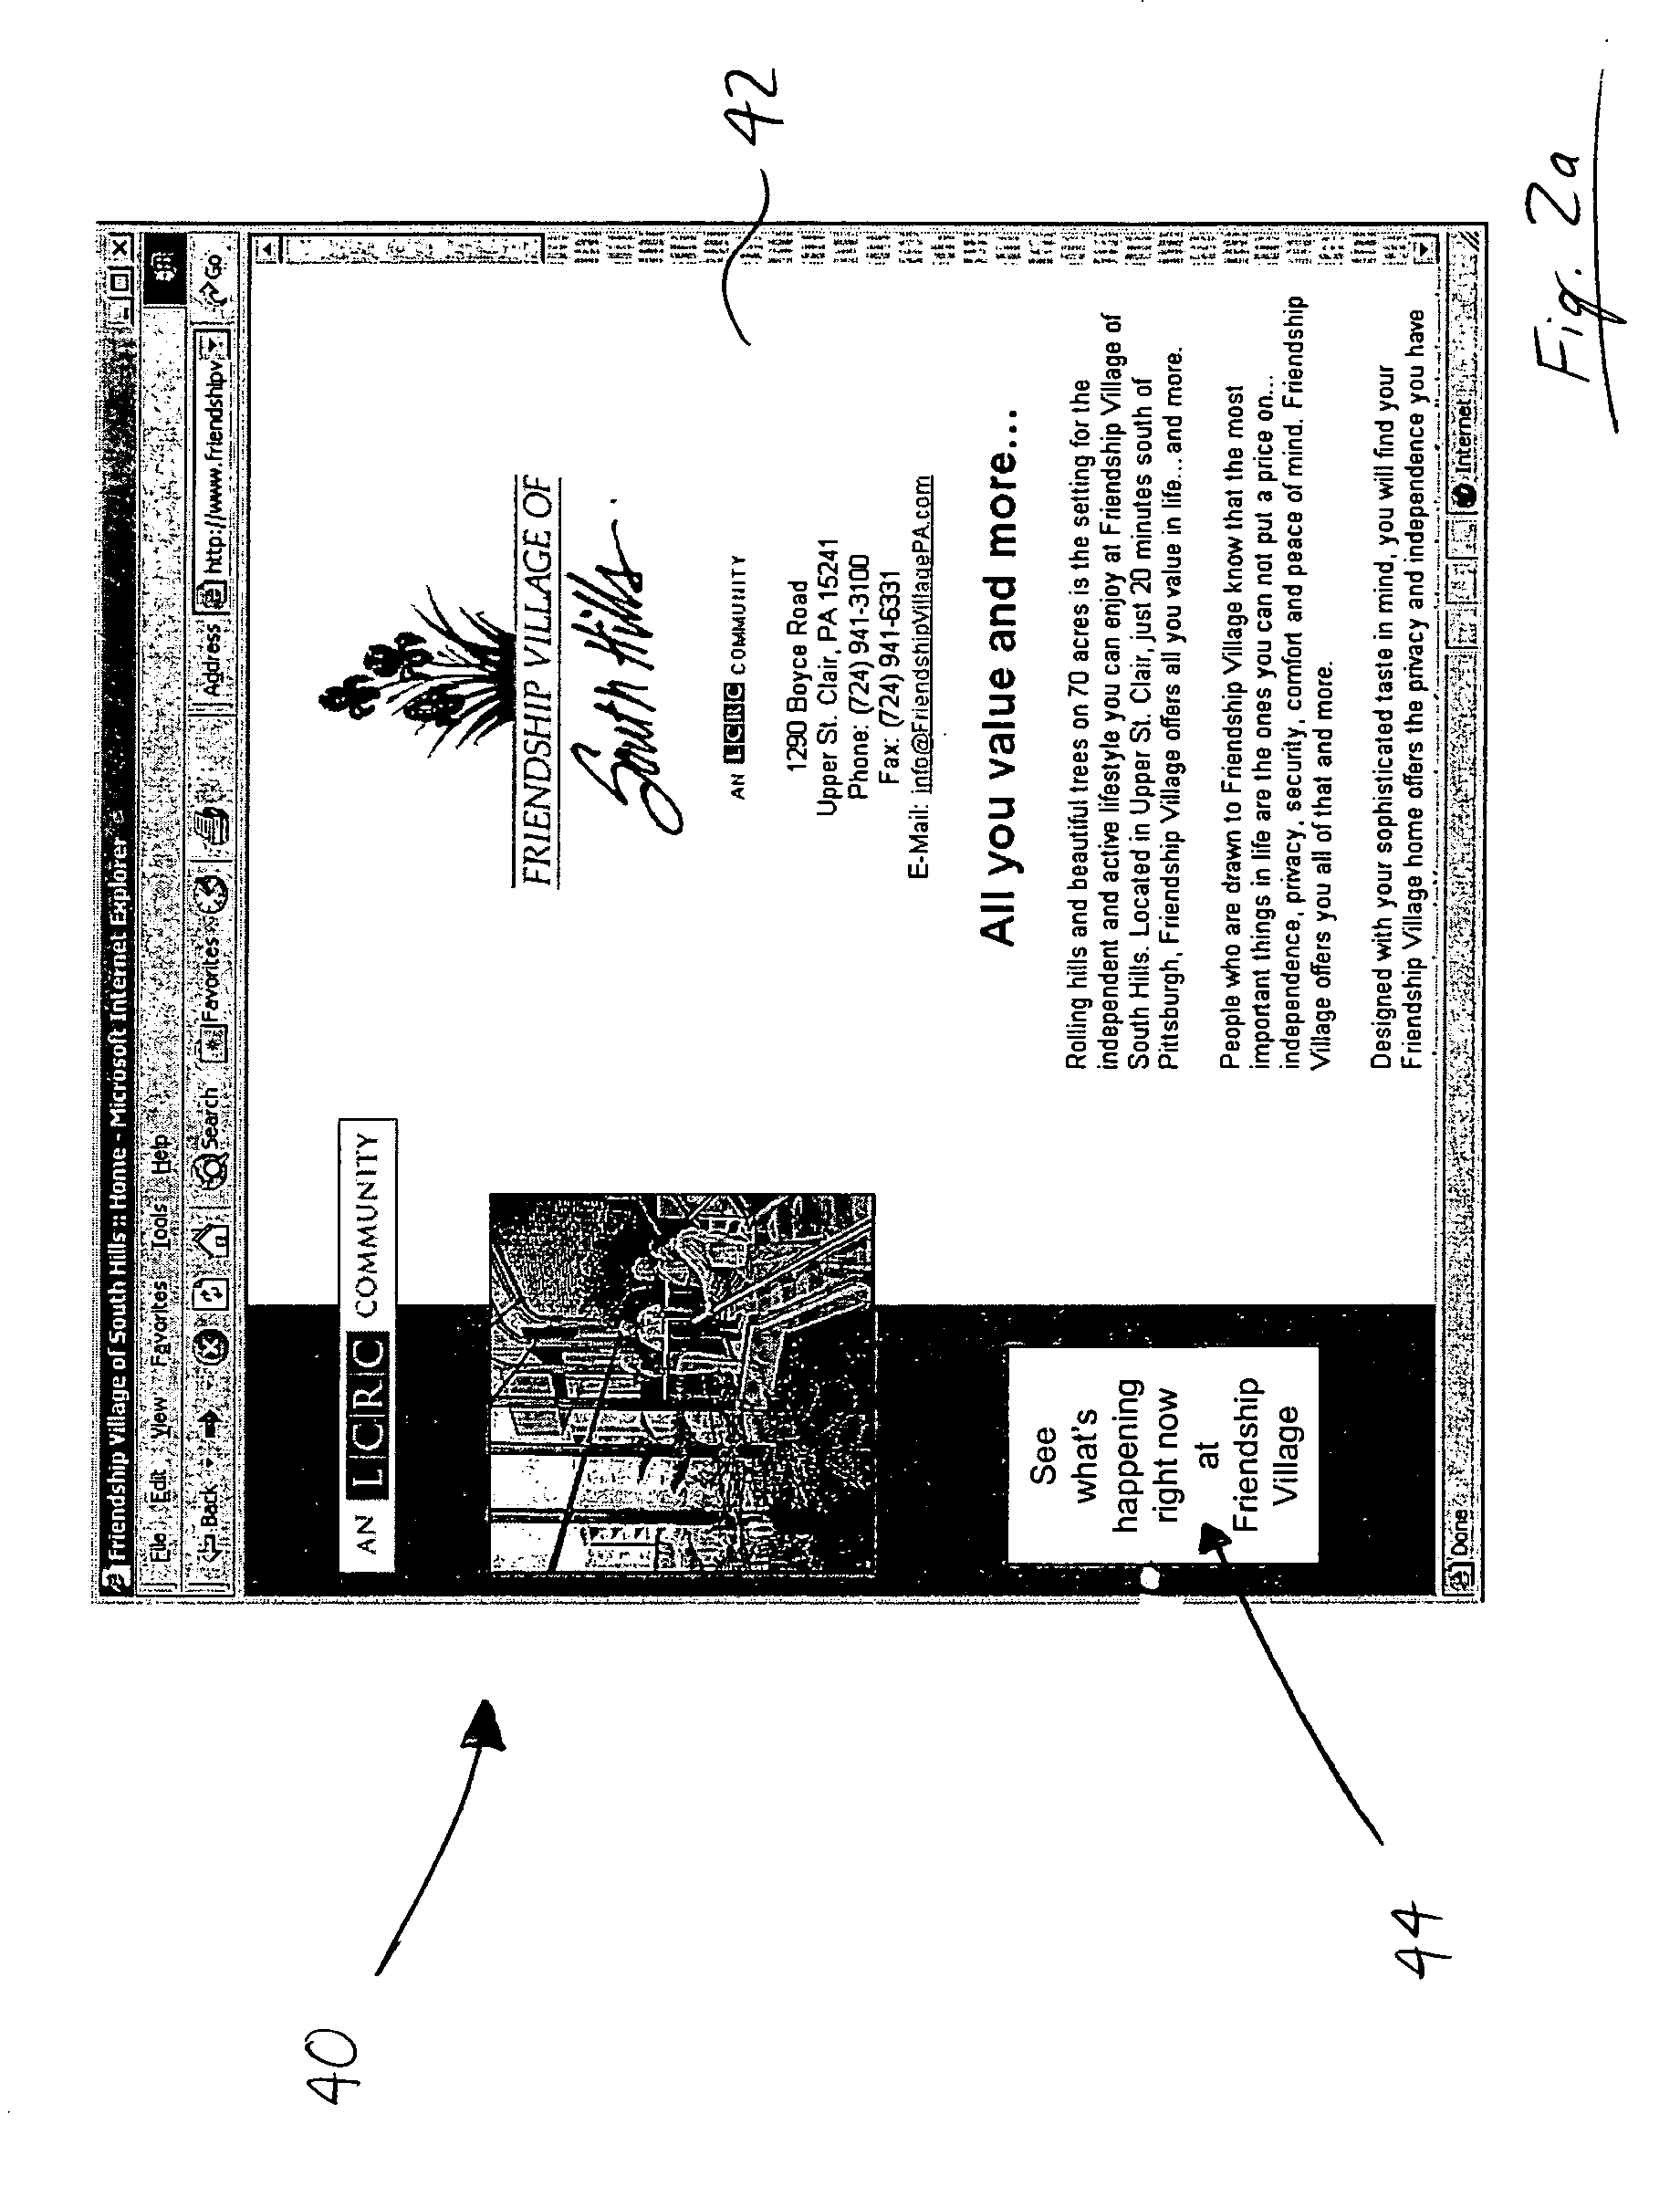 Method and system for creating, managing and delivering community information